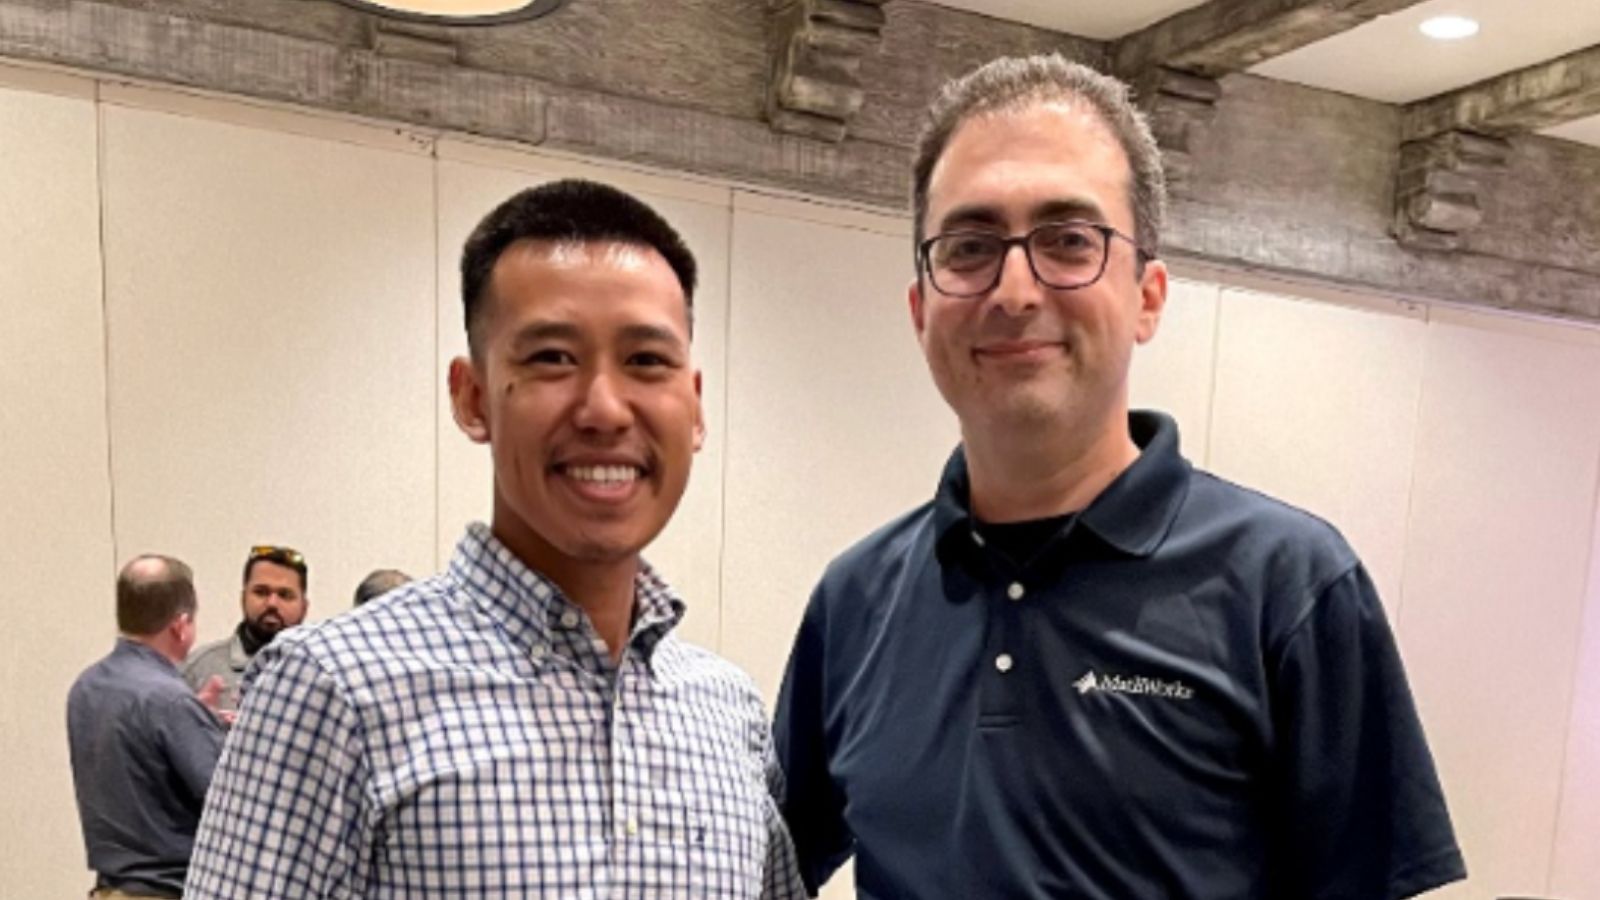 Ackara (Left) and to the right (Idin Motedayen-Aval), who is a MathWorks Application Engineering Manager. I was able to attend a MathWorks event for Northrop Grumman employees on wireless communication applications featuring MATLAB and Simulink!